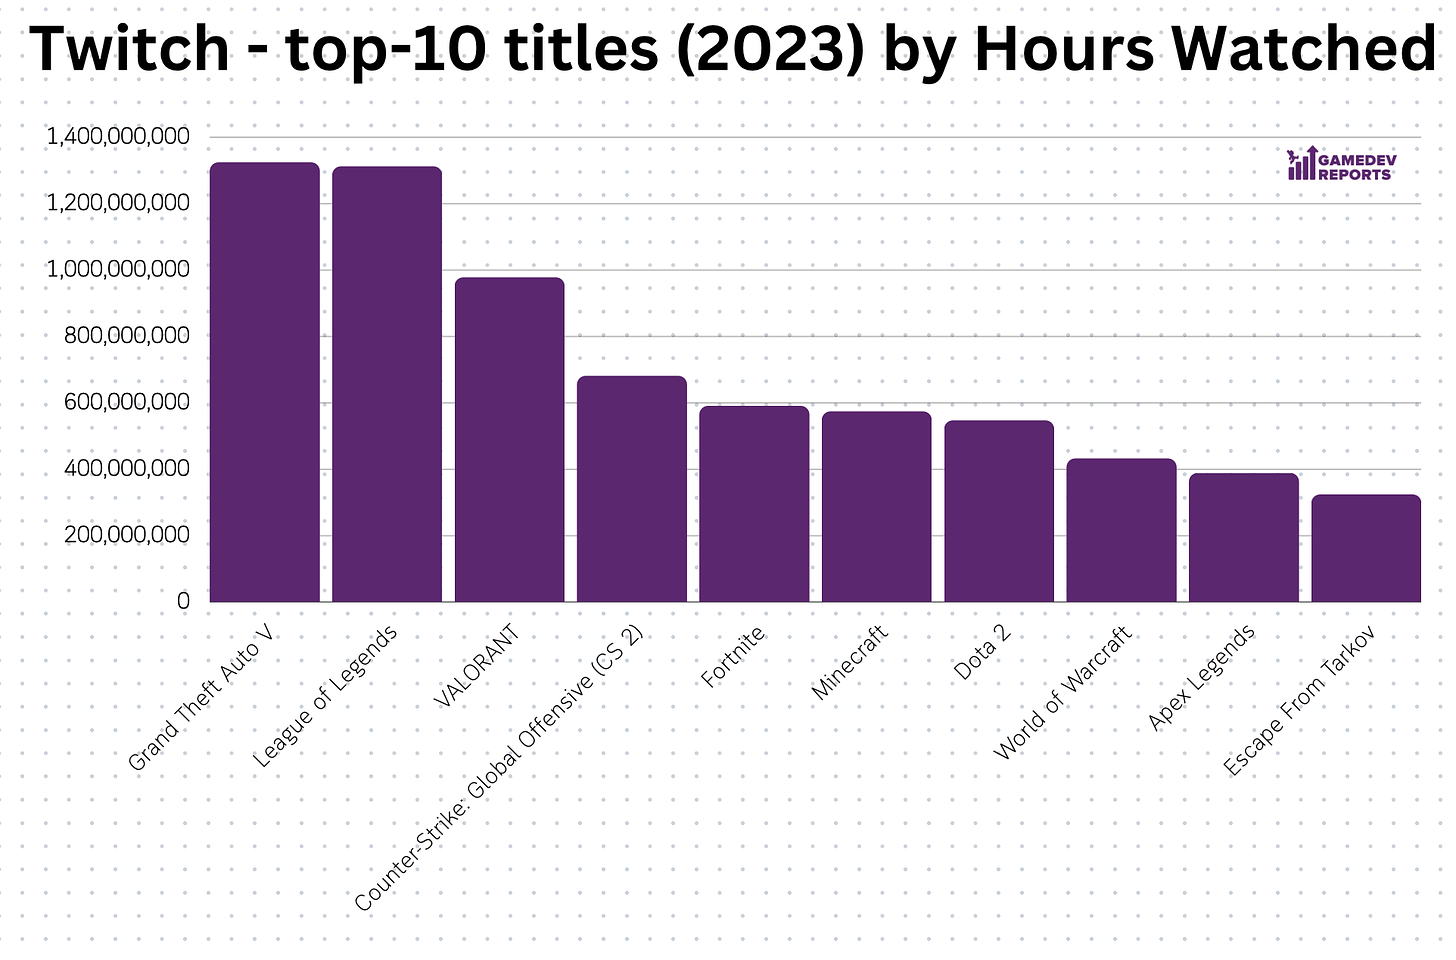 Twitch top 10 titles by hours watched